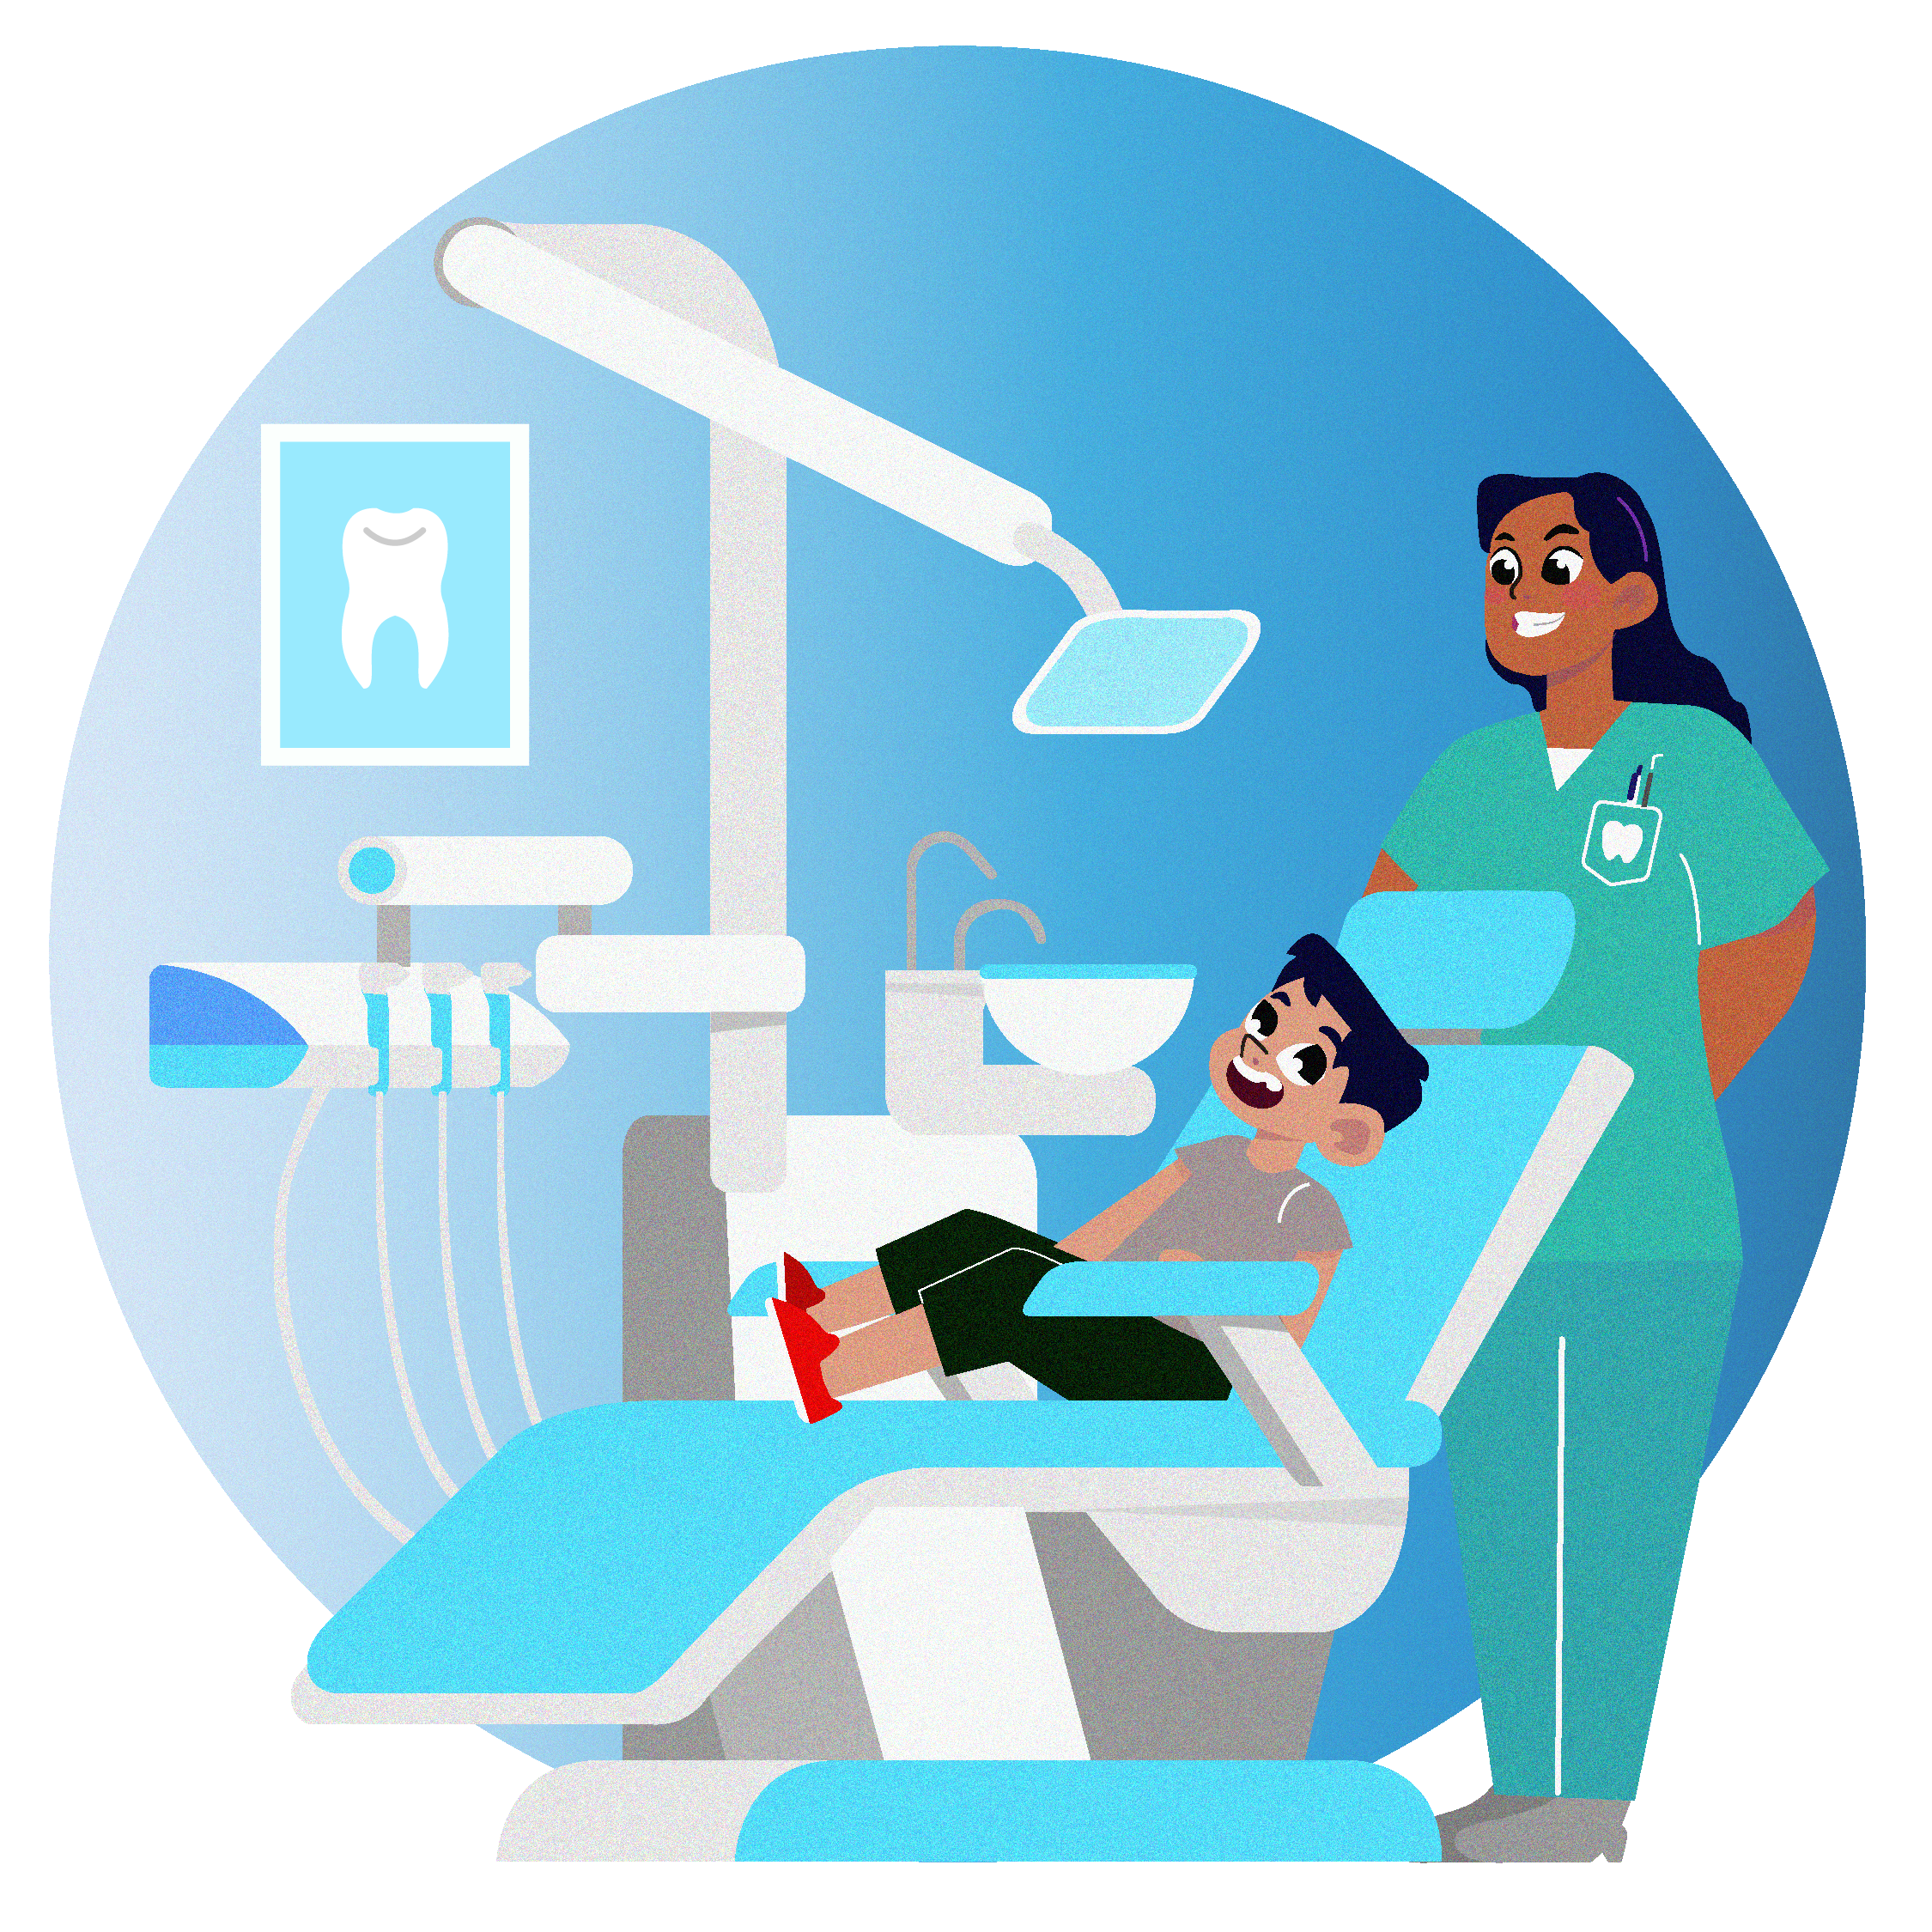 Illustration of the dental provider and child in the dental office.